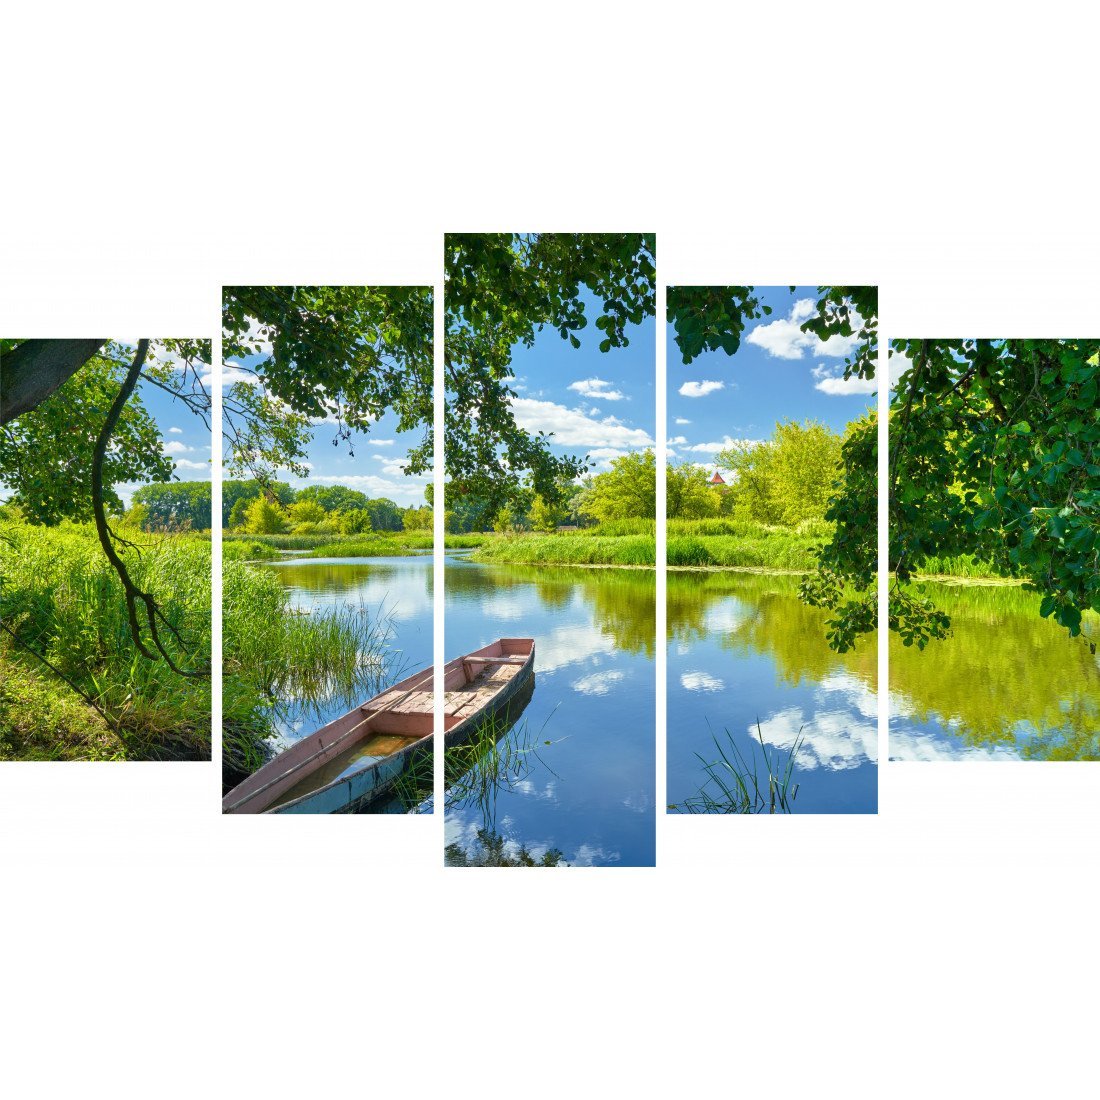 Tablou Forex 5 piese Sky Clouds, River, Boat, Green Trees - clevny.ro